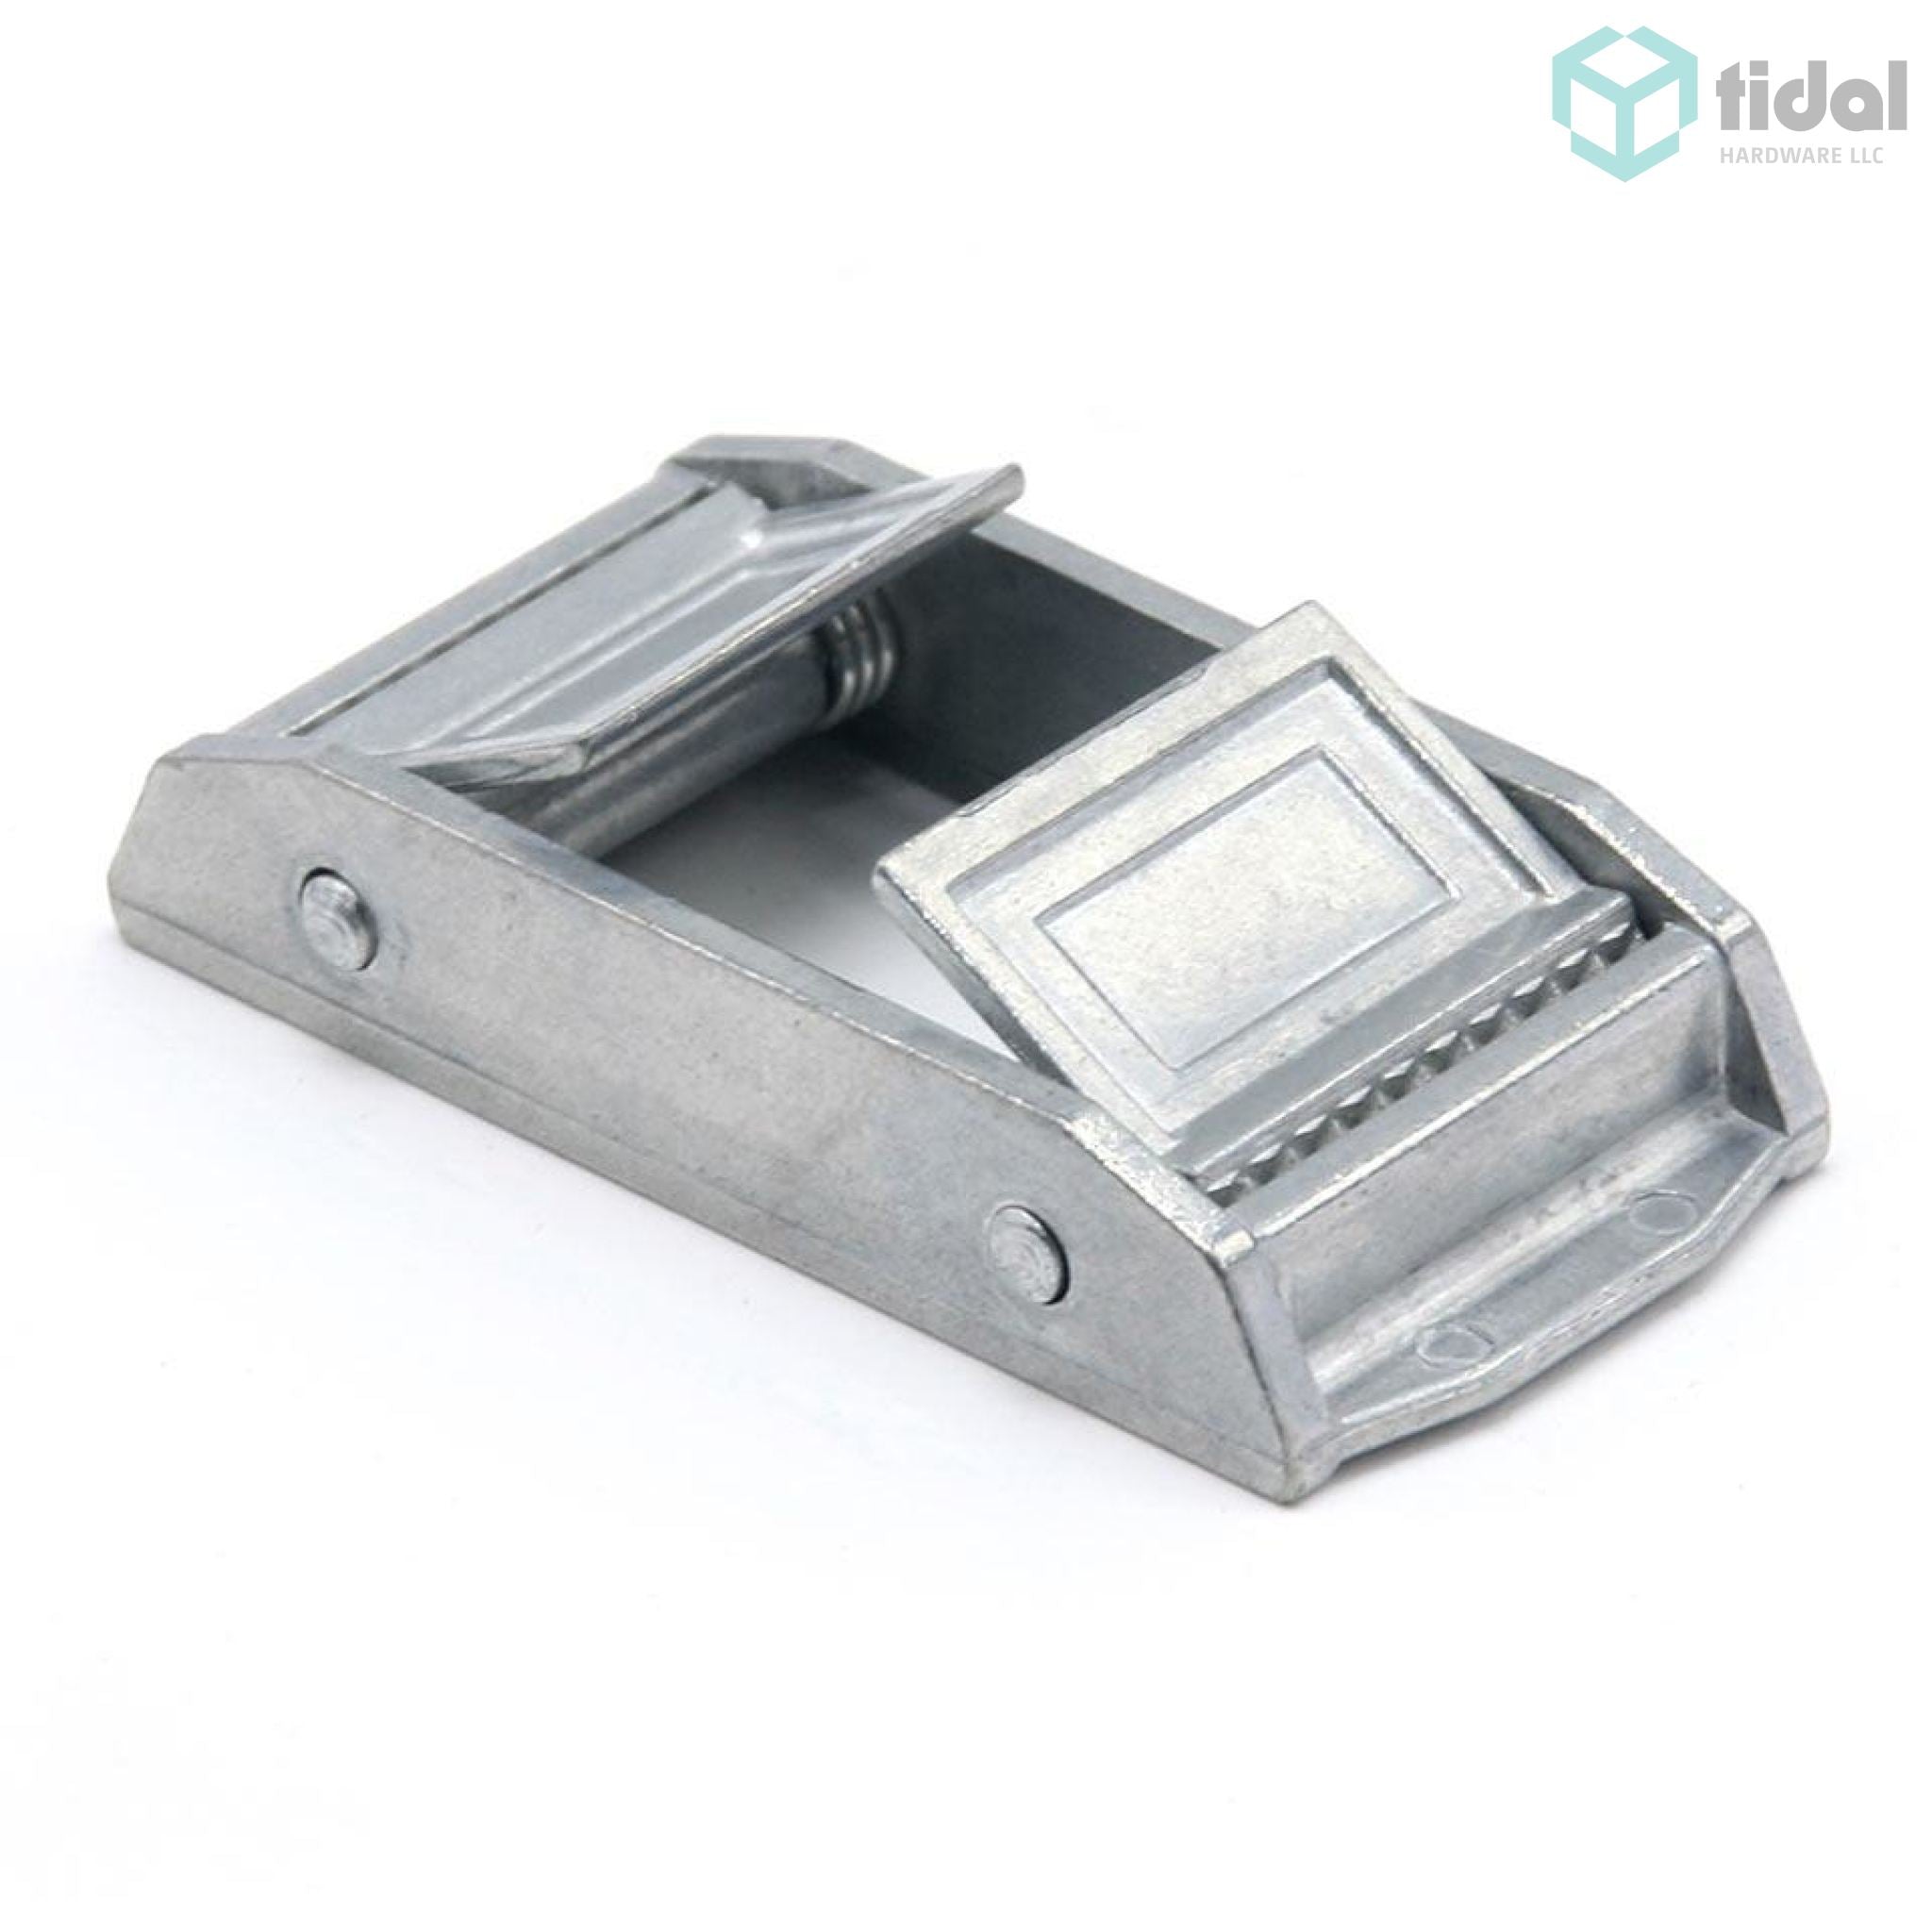 Self-Closing Buckle - Easy operation combined with high load capacity